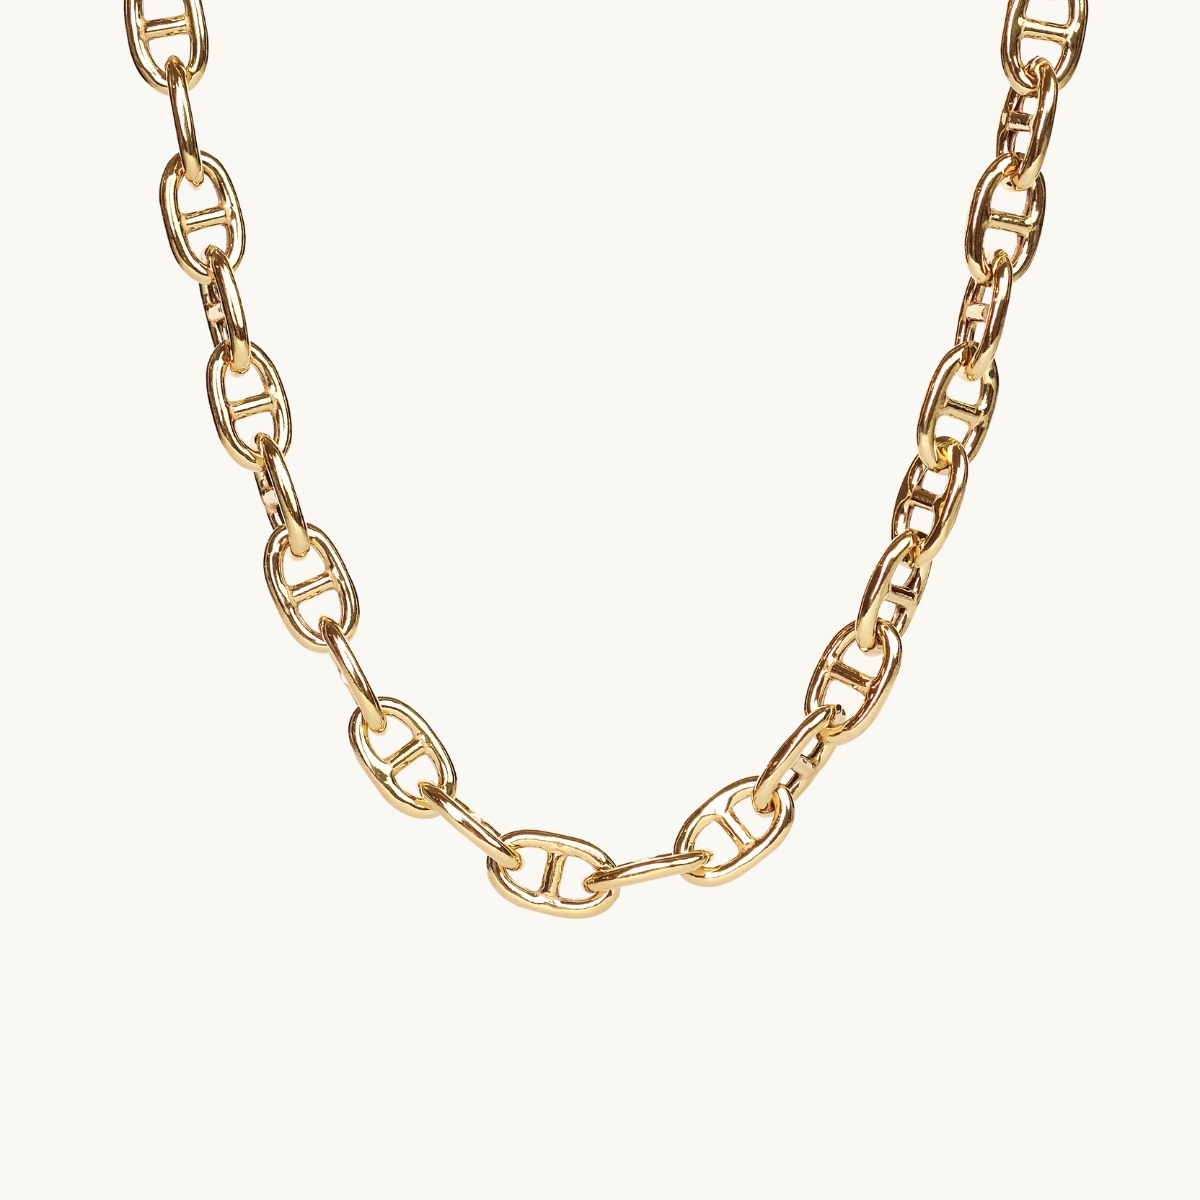 Gold necklace with anchor link chain